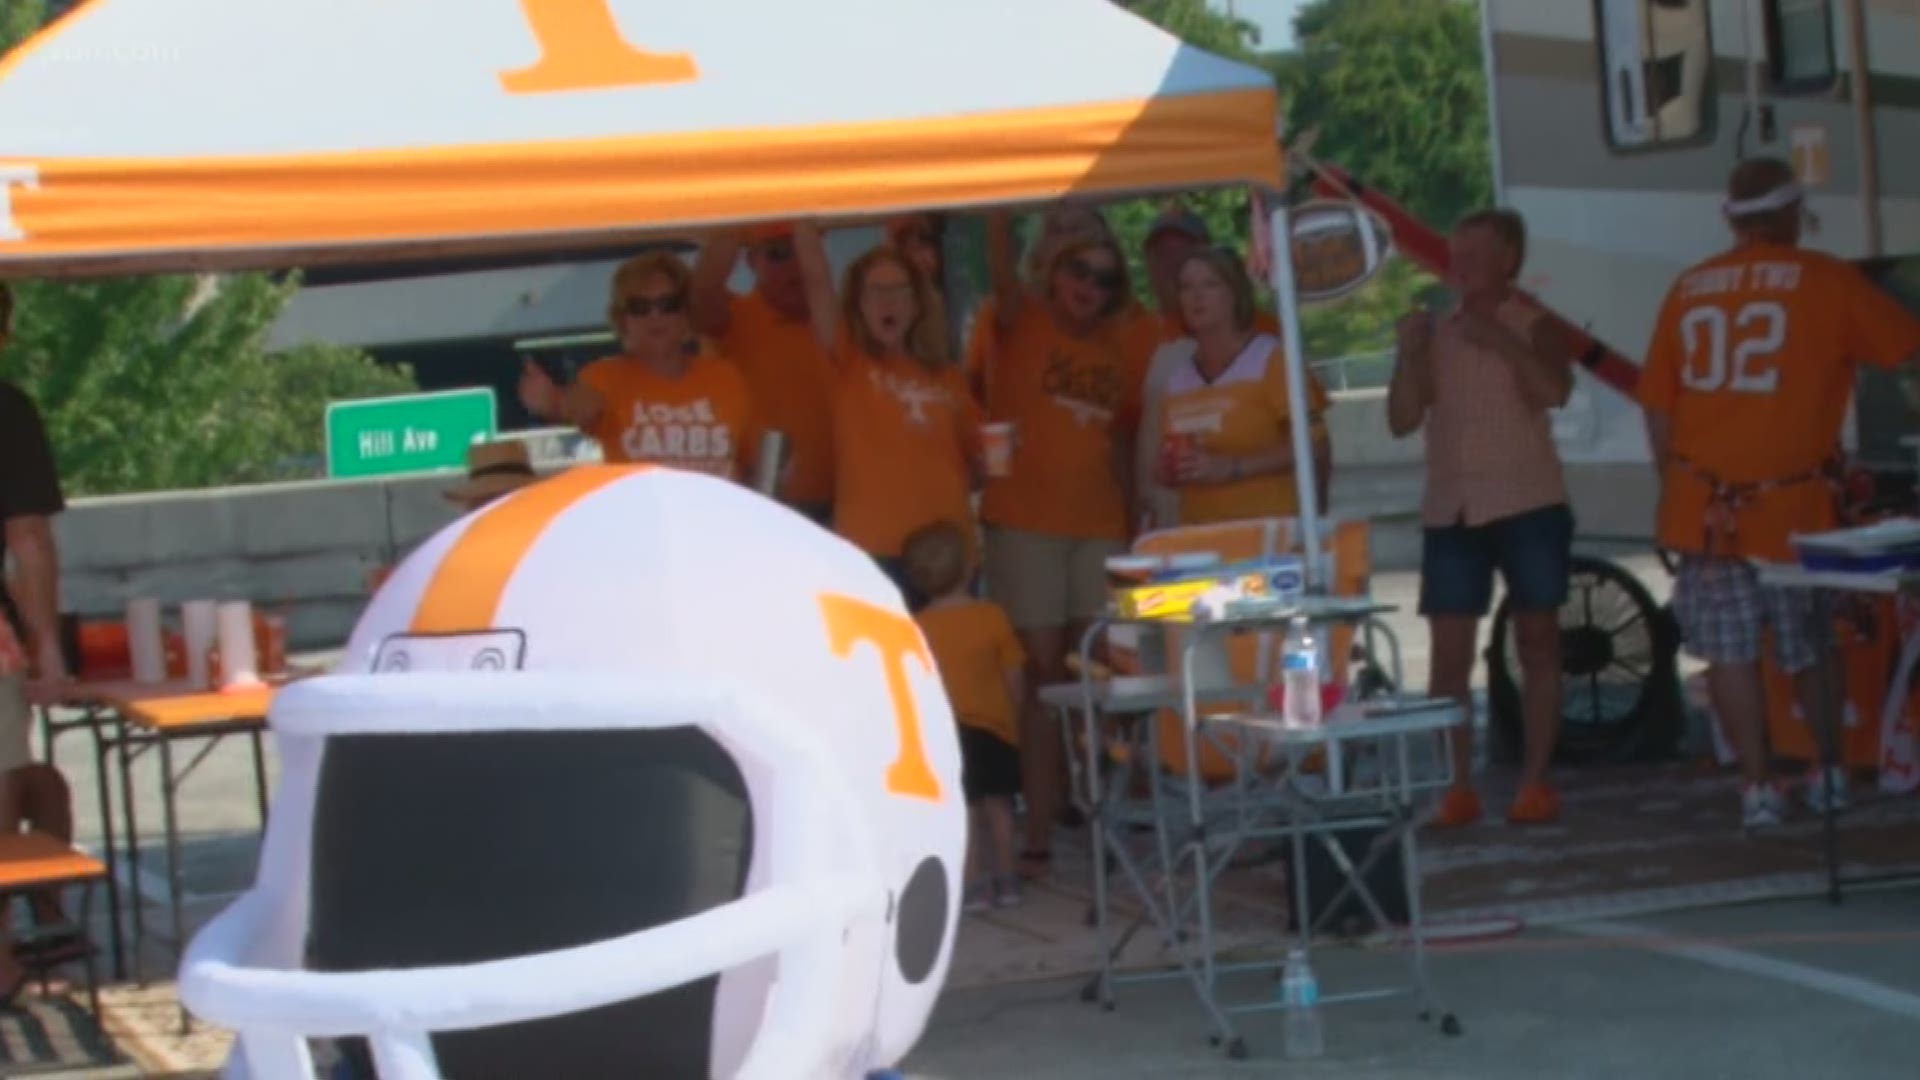 When you do a live show from a tailgate with some Vol Fans, you can bet they're going to cheer the team on.
Sept. 21, 2018-4pm